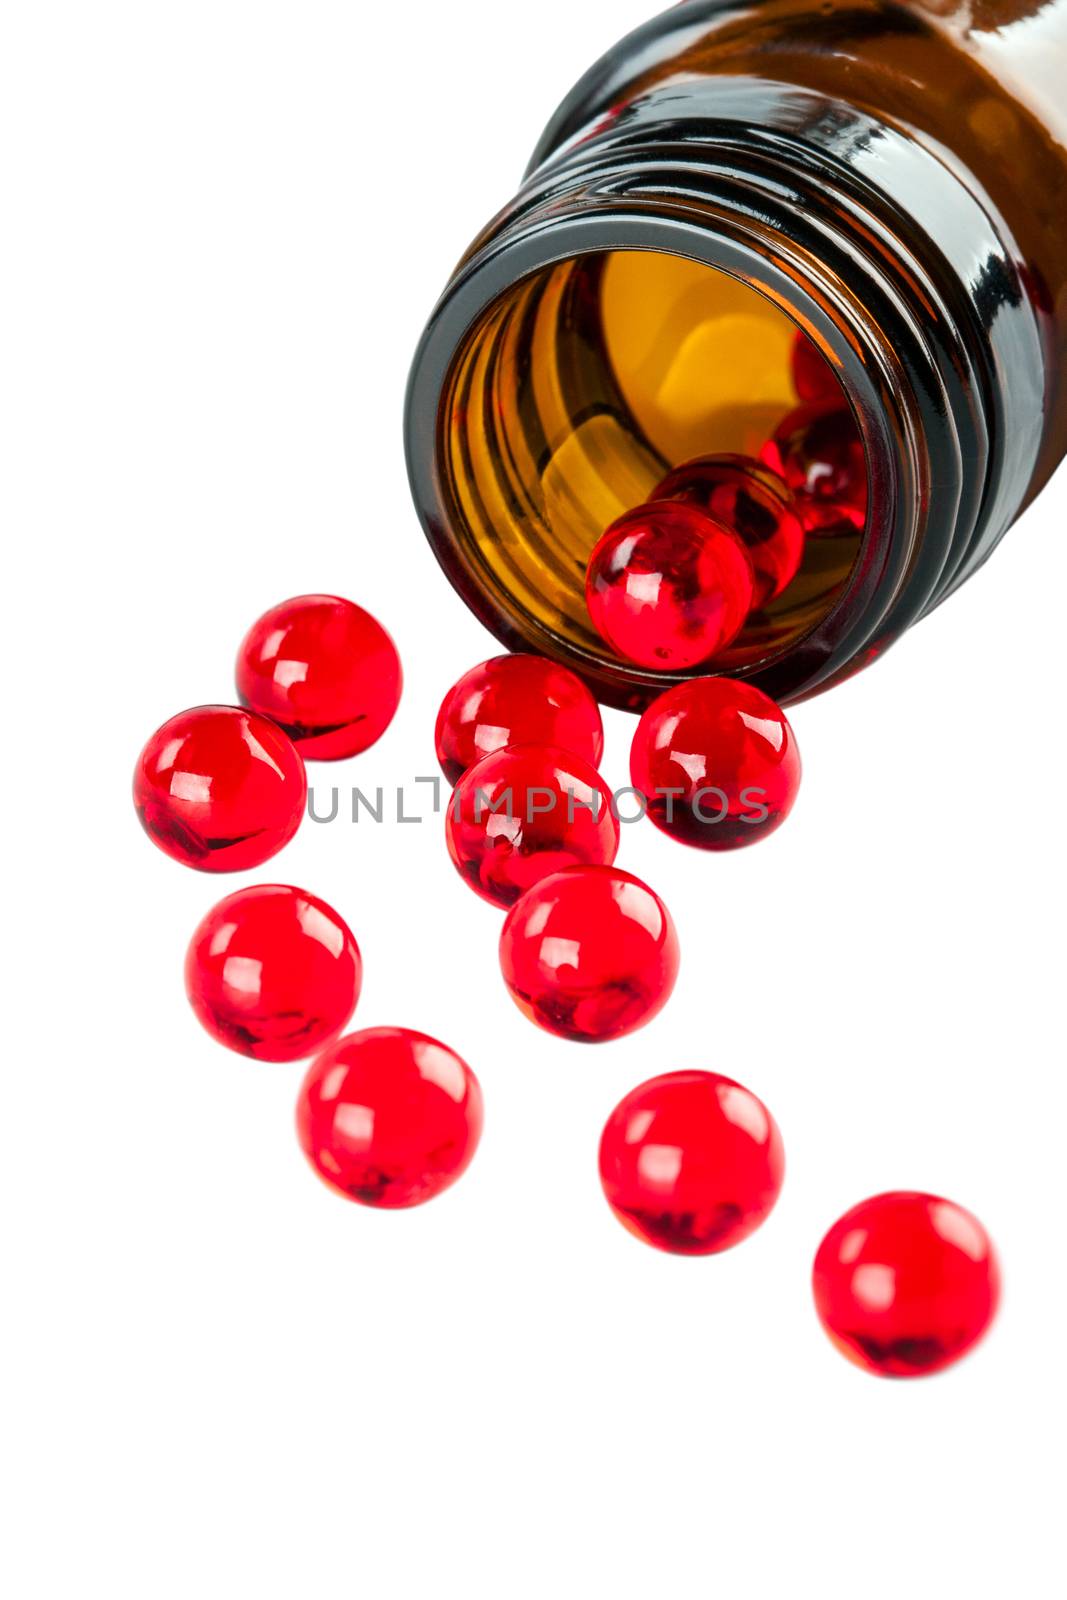 Red capsules on a white background